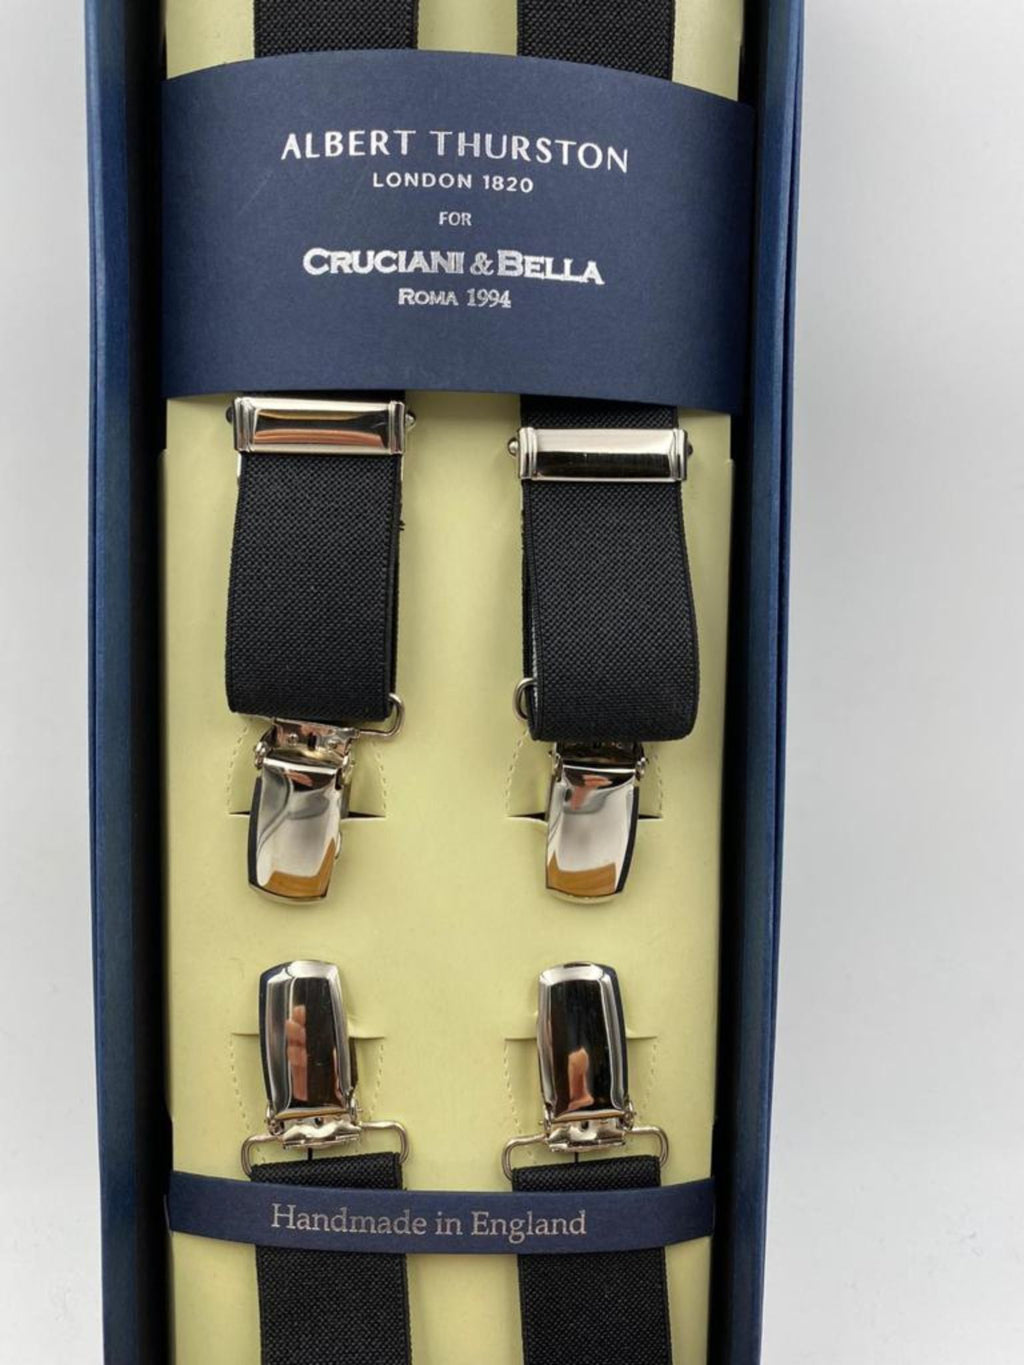 Albert Thurston for Cruciani & Bella Made in England Clip on Adjustable Sizing 25 mm elastic braces Black Plain Color X-Shaped Nickel Fittings Size: L